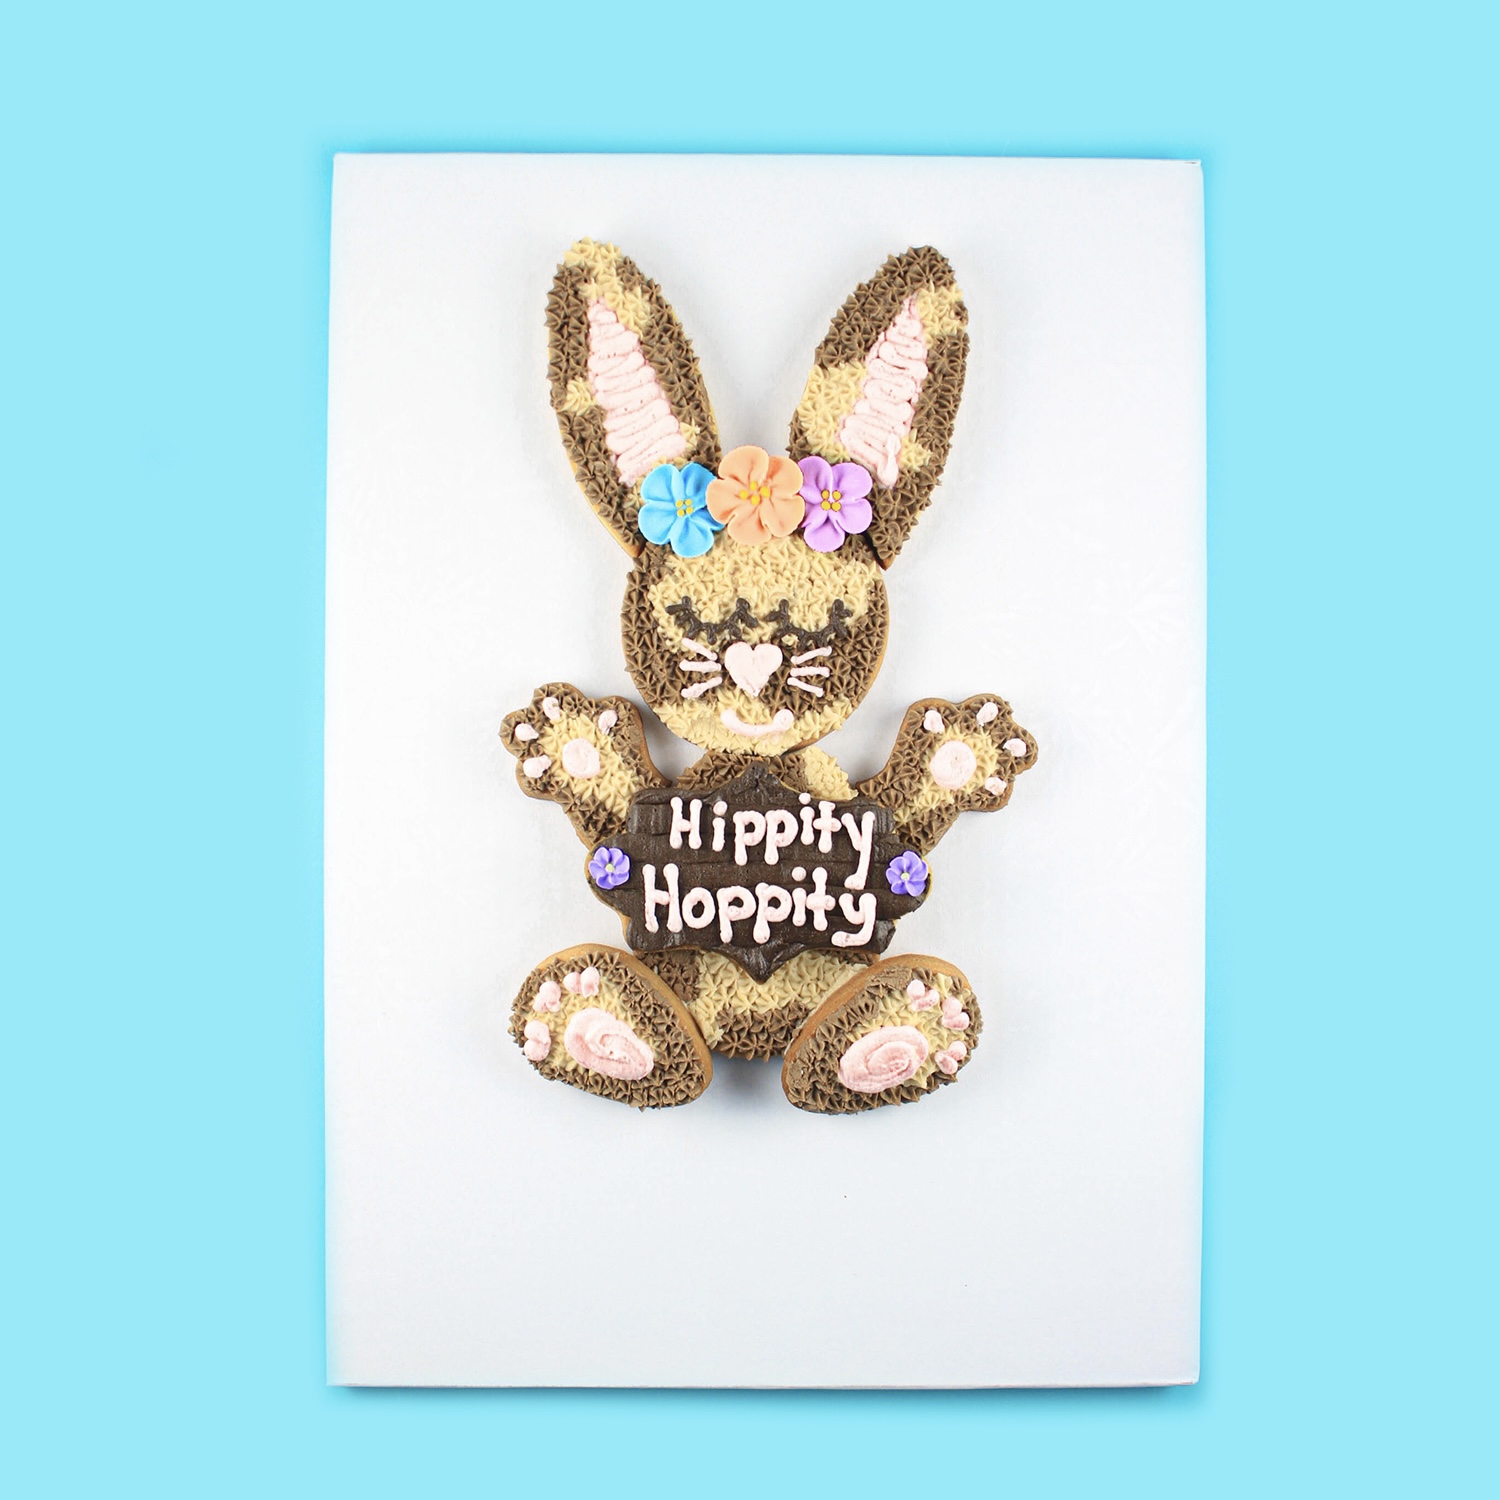 Buttercream Decorated Cookie Puzzle of a Bunny